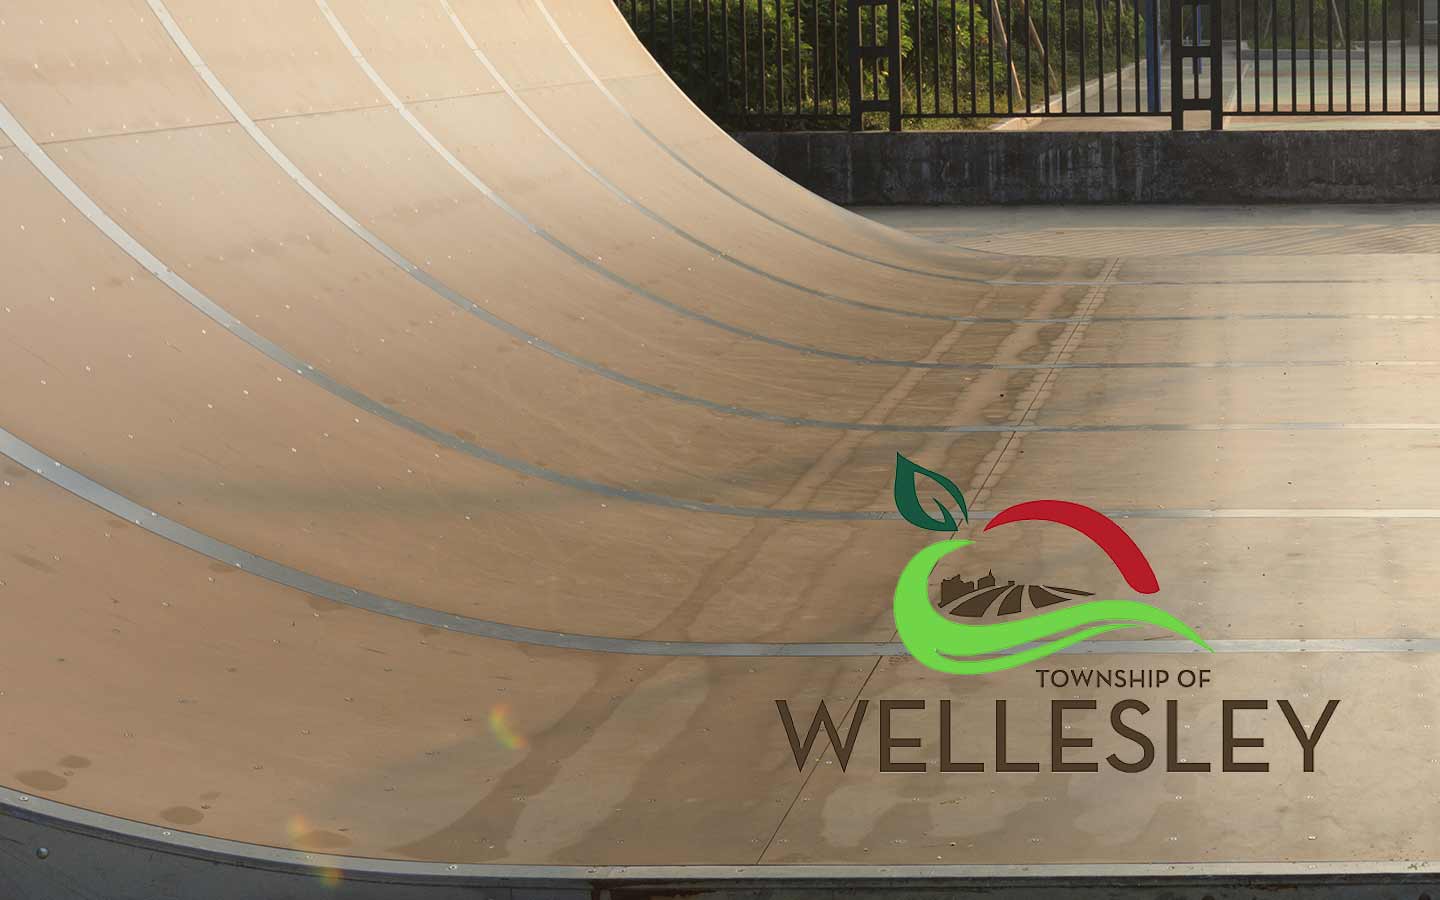                      Council still undecided about reopening splash pad in Wellesley                             
                     